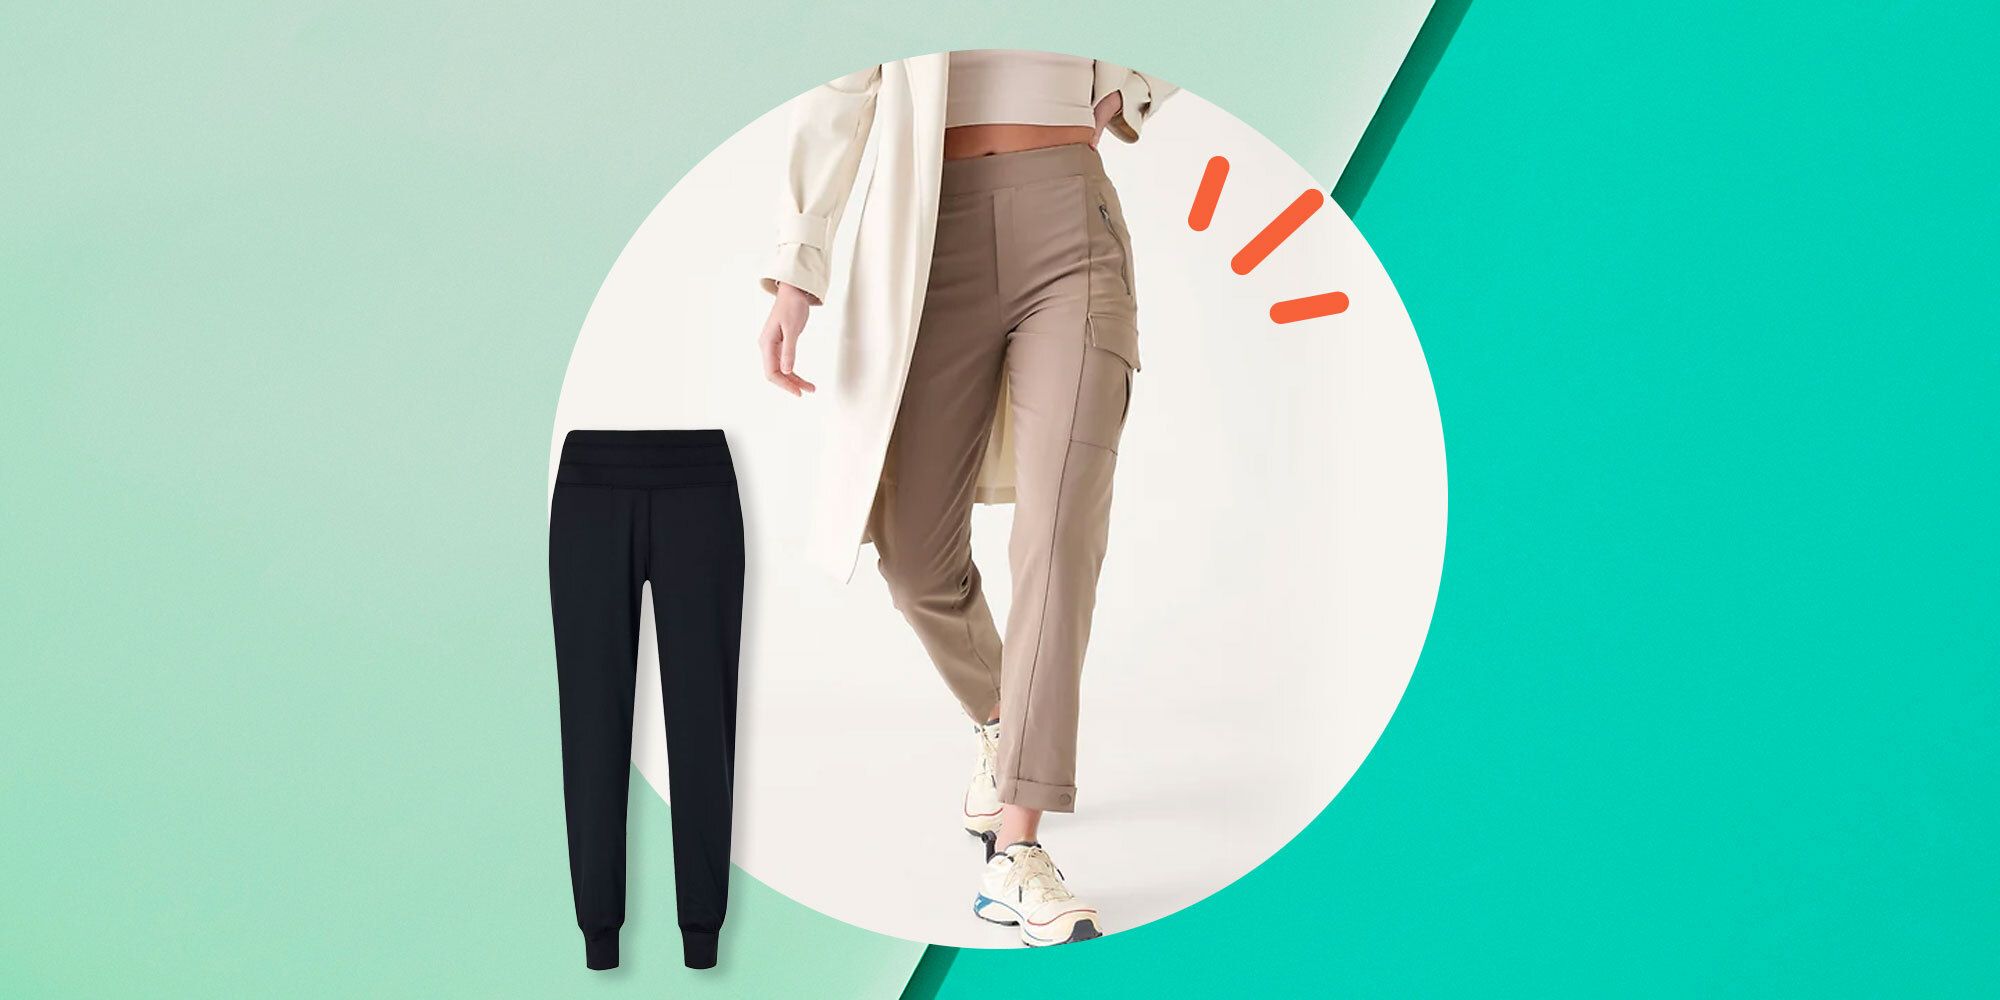 These Comfy Travel Pants Are Here to Help You Dress Your Best When Traveling